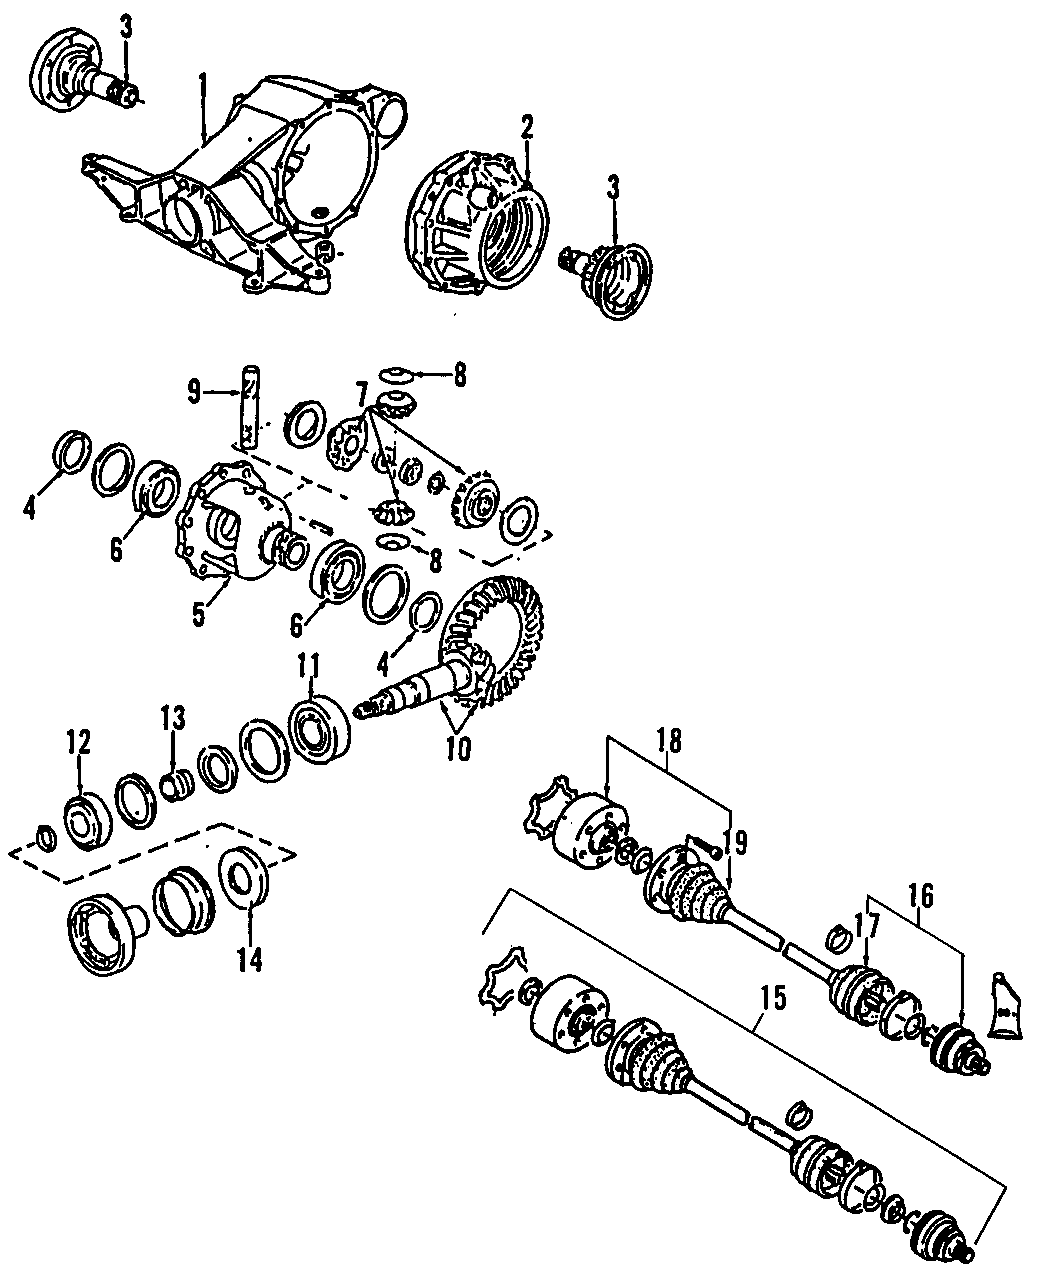 19DRIVE AXLES. REAR AXLE. AXLE SHAFTS & JOINTS. DIFFERENTIAL. PROPELLER SHAFT.https://images.simplepart.com/images/parts/motor/fullsize/F208150.png